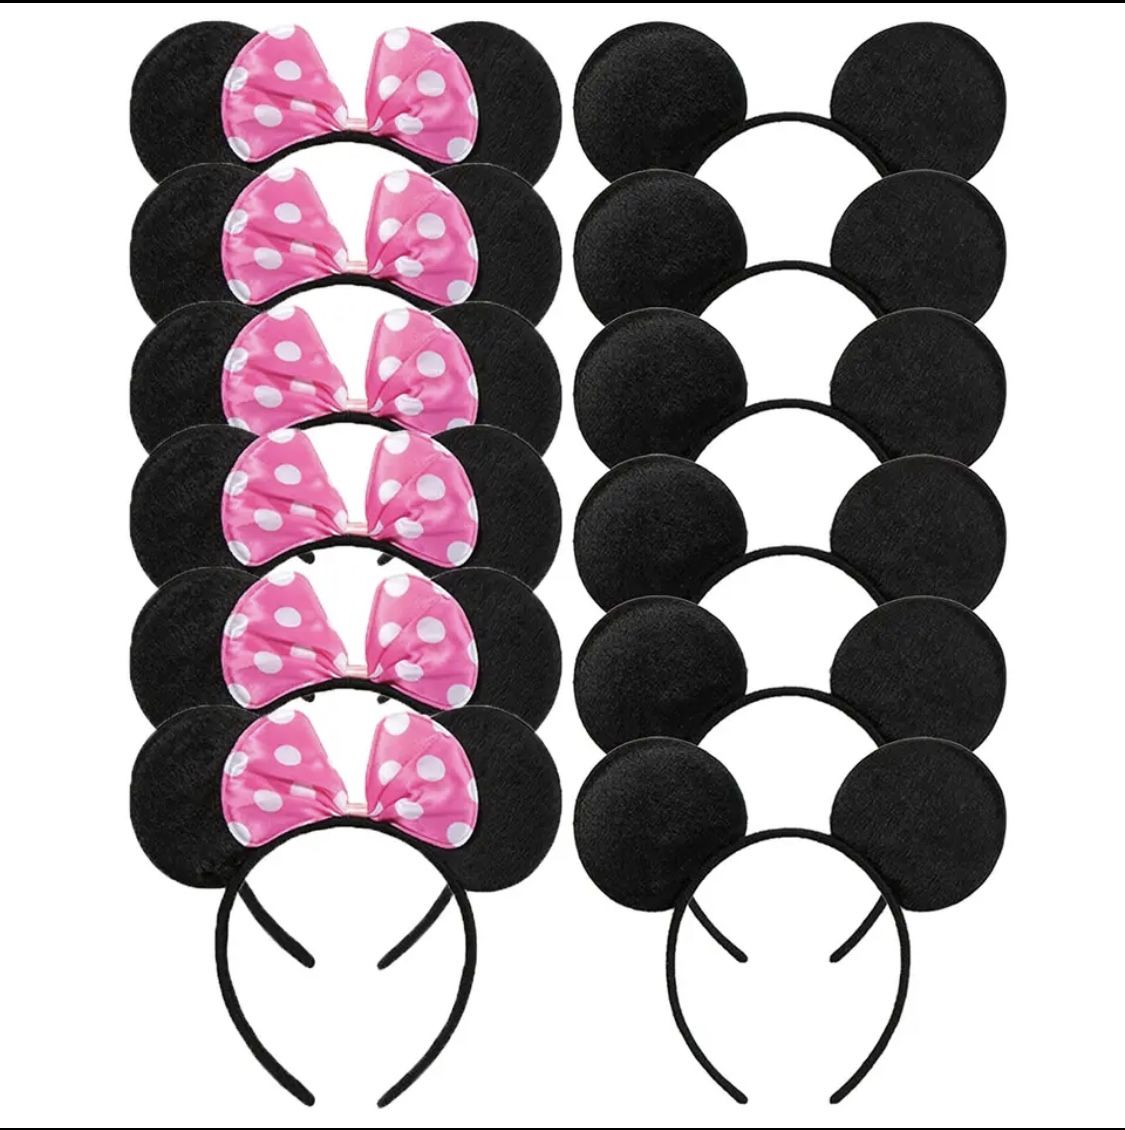 Disney Mickey Minnie Mouse Ears Headbands - Brand New In package 